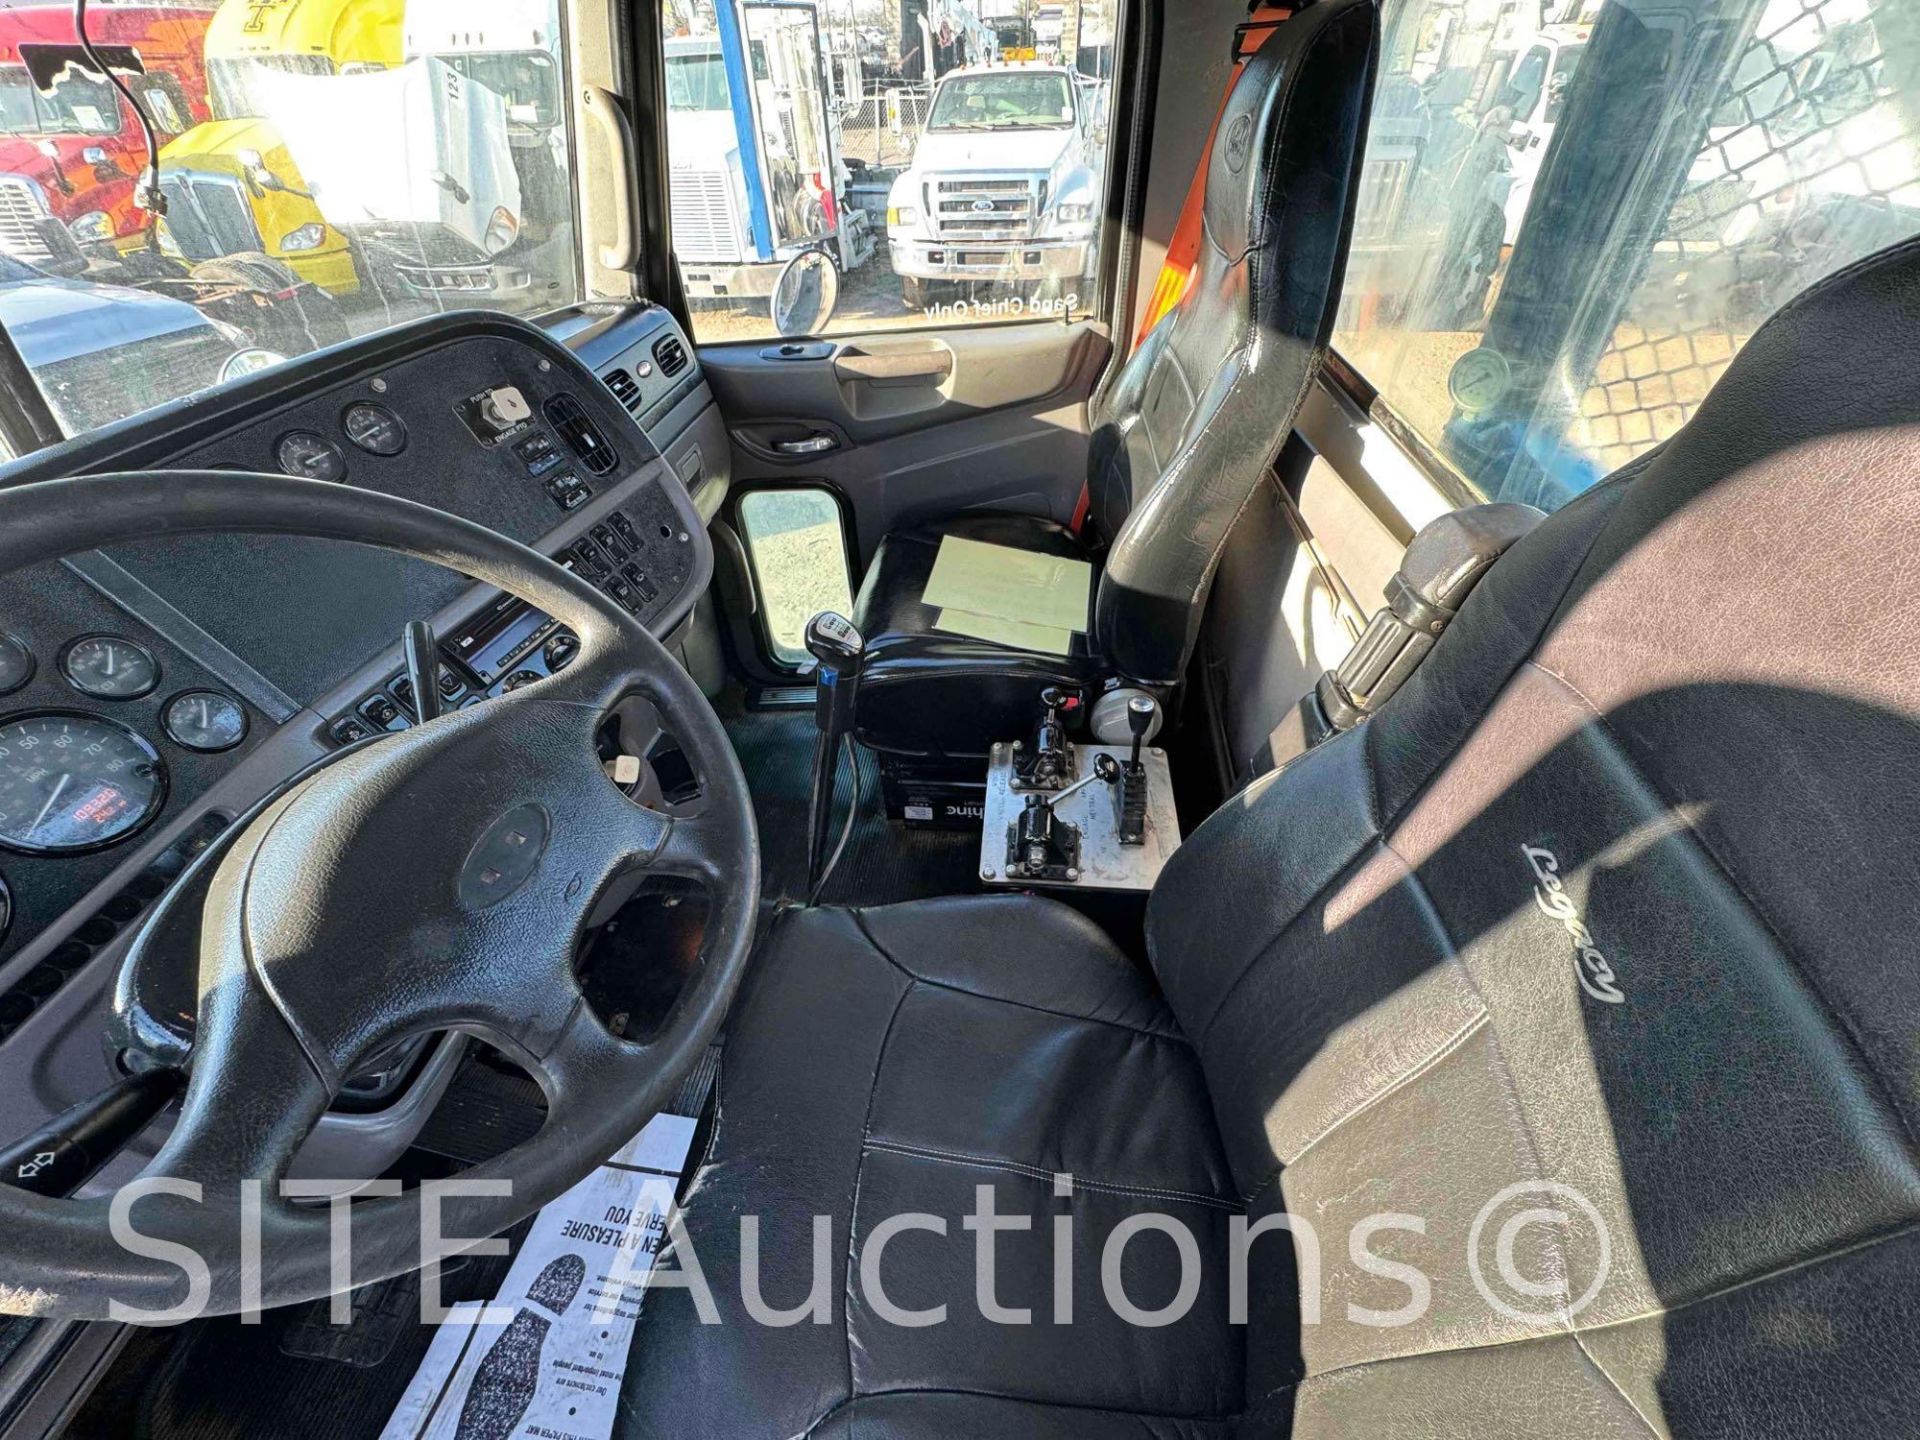 2012 Peterbilt 365 T/A Daycab Truck Tractor - Image 13 of 19